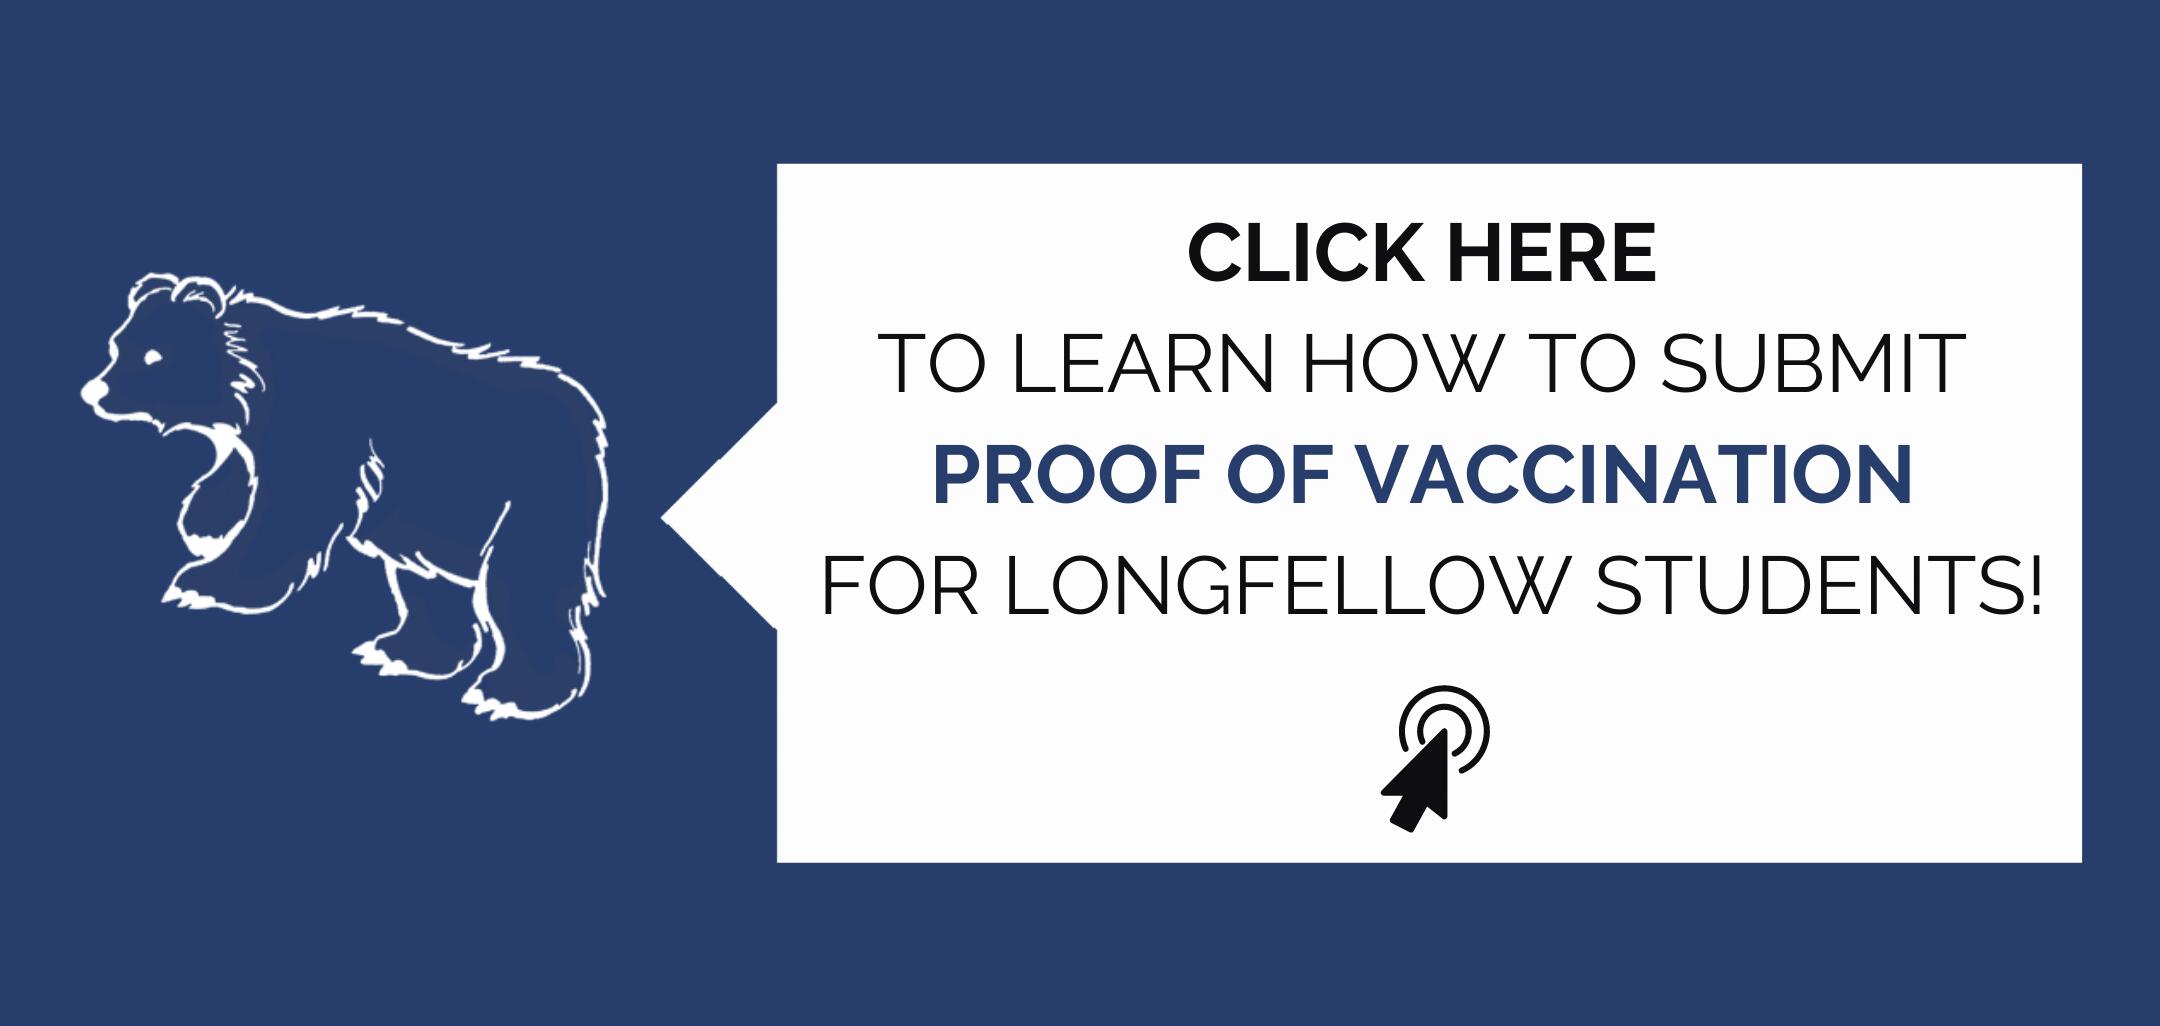 Click here to learn how to submit proof of vaccination for Longfellow students